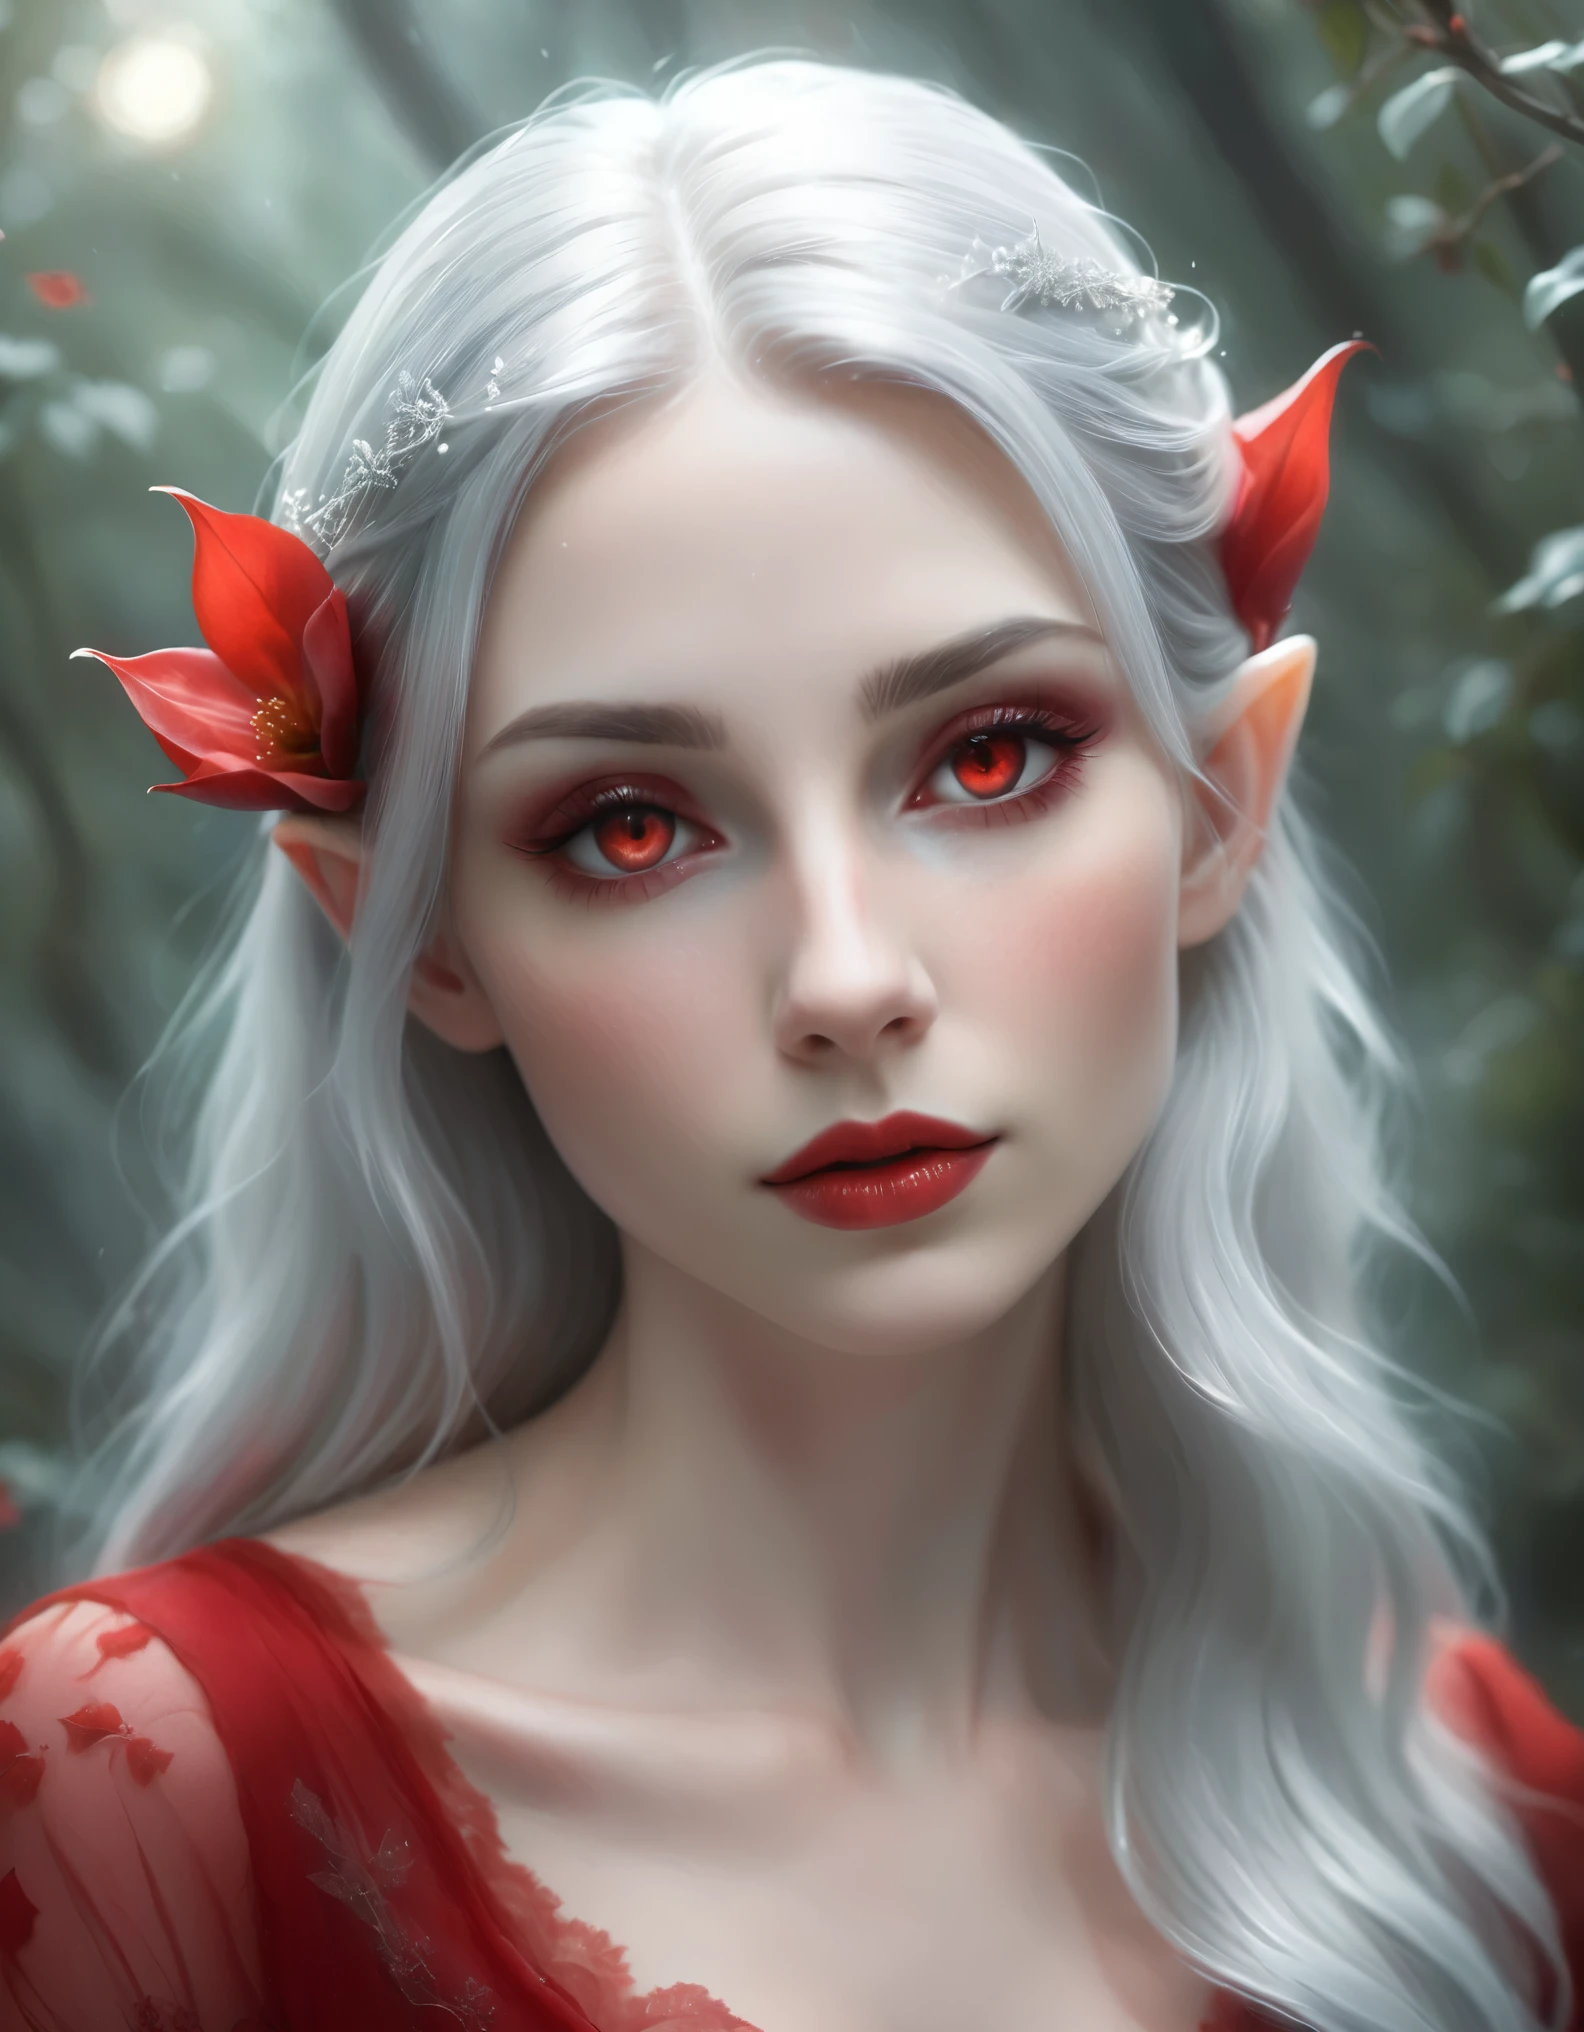 Create an ethereal, ultra realistic photo style female elf with long, flowing silver hair adorned with a red flower. The character should have pale, smooth skin with intricate tattoos on her arm and chest. She should be dressed in a revealing, elegant red outfit with delicate straps and a black lace hem. Her eyes are closed, showcasing bold red eyeshadow and dark, dramatic eyelashes, and her lips are painted in a matching red color. Her expression is serene and otherworldly. The background should be a misty, dark setting with a soft light illuminating her from above, creating a mysterious and magical atmosphere. Add subtle highlights to her hair and dress to enhance the ethereal feel. Distant full body view from above, ultra realistic photo, 16k, vibrant colors